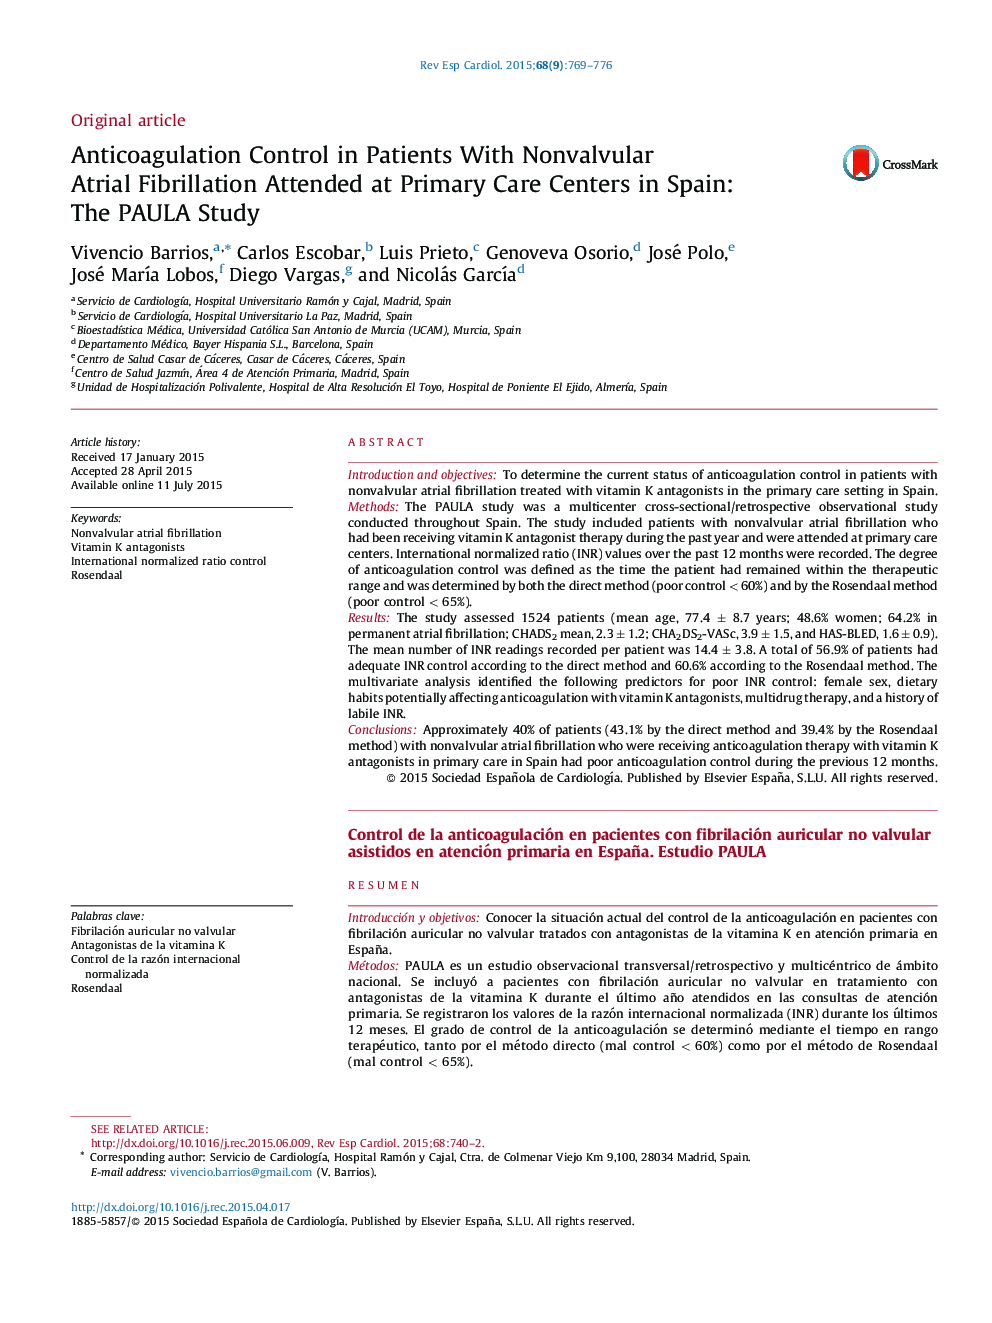 Anticoagulation Control in Patients With Nonvalvular Atrial Fibrillation Attended at Primary Care Centers in Spain: The PAULA Study